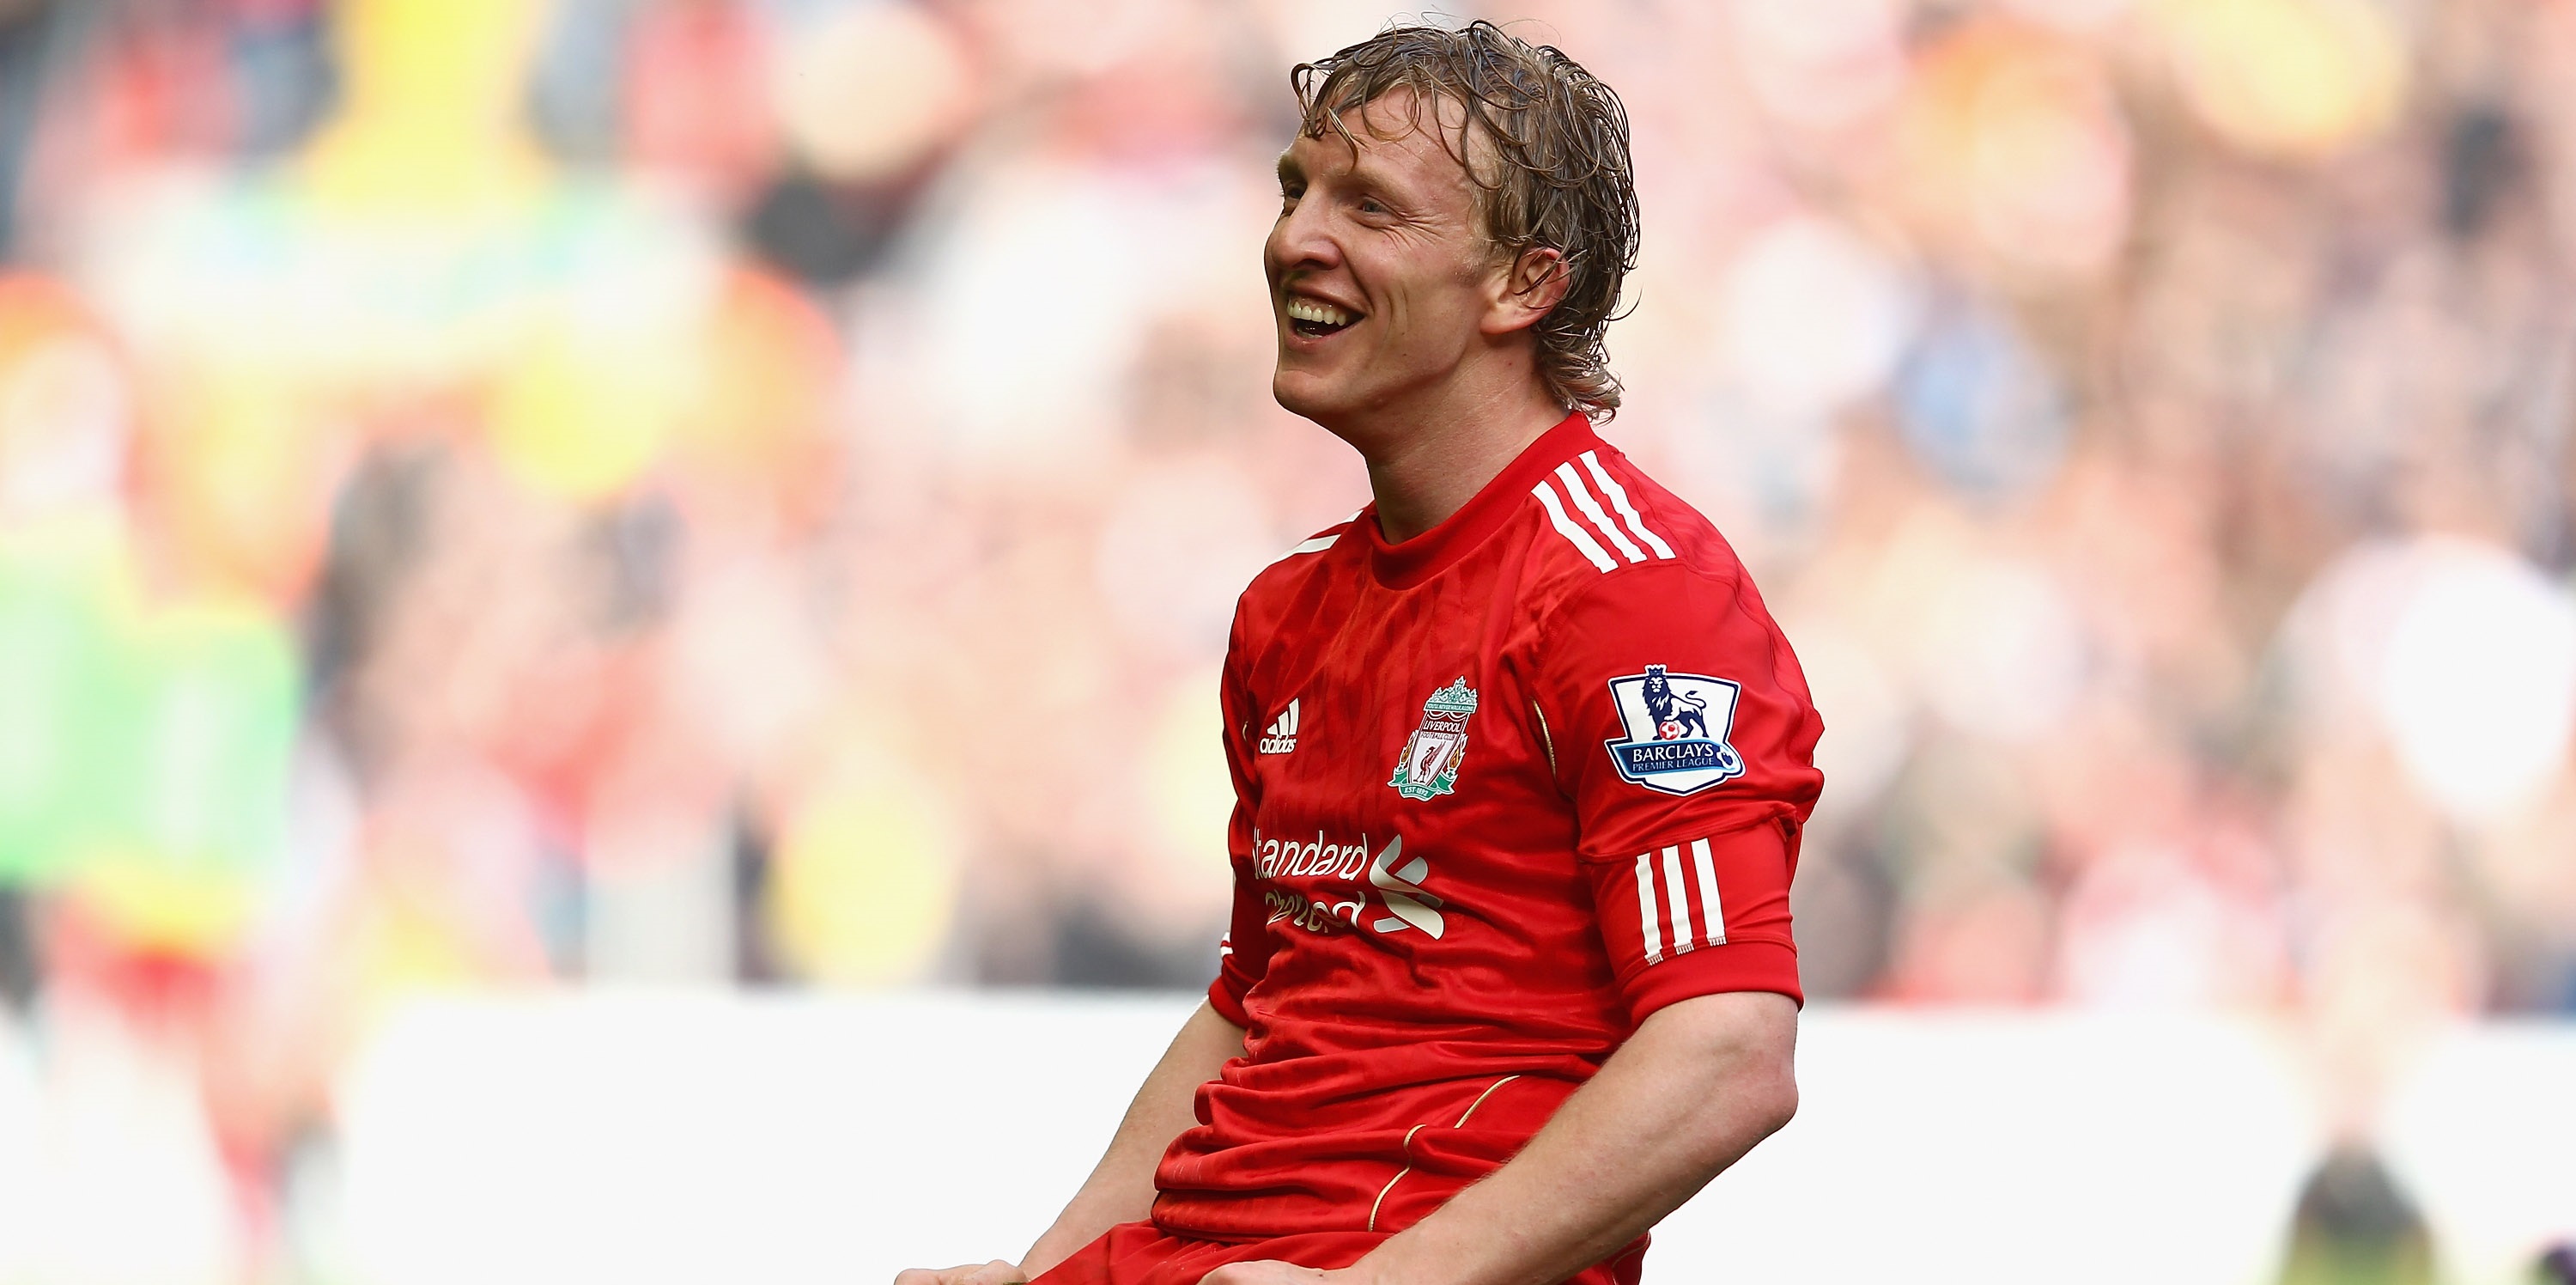 Dirk Kuyt takes first managerial role four years after ending his 20-year playing career